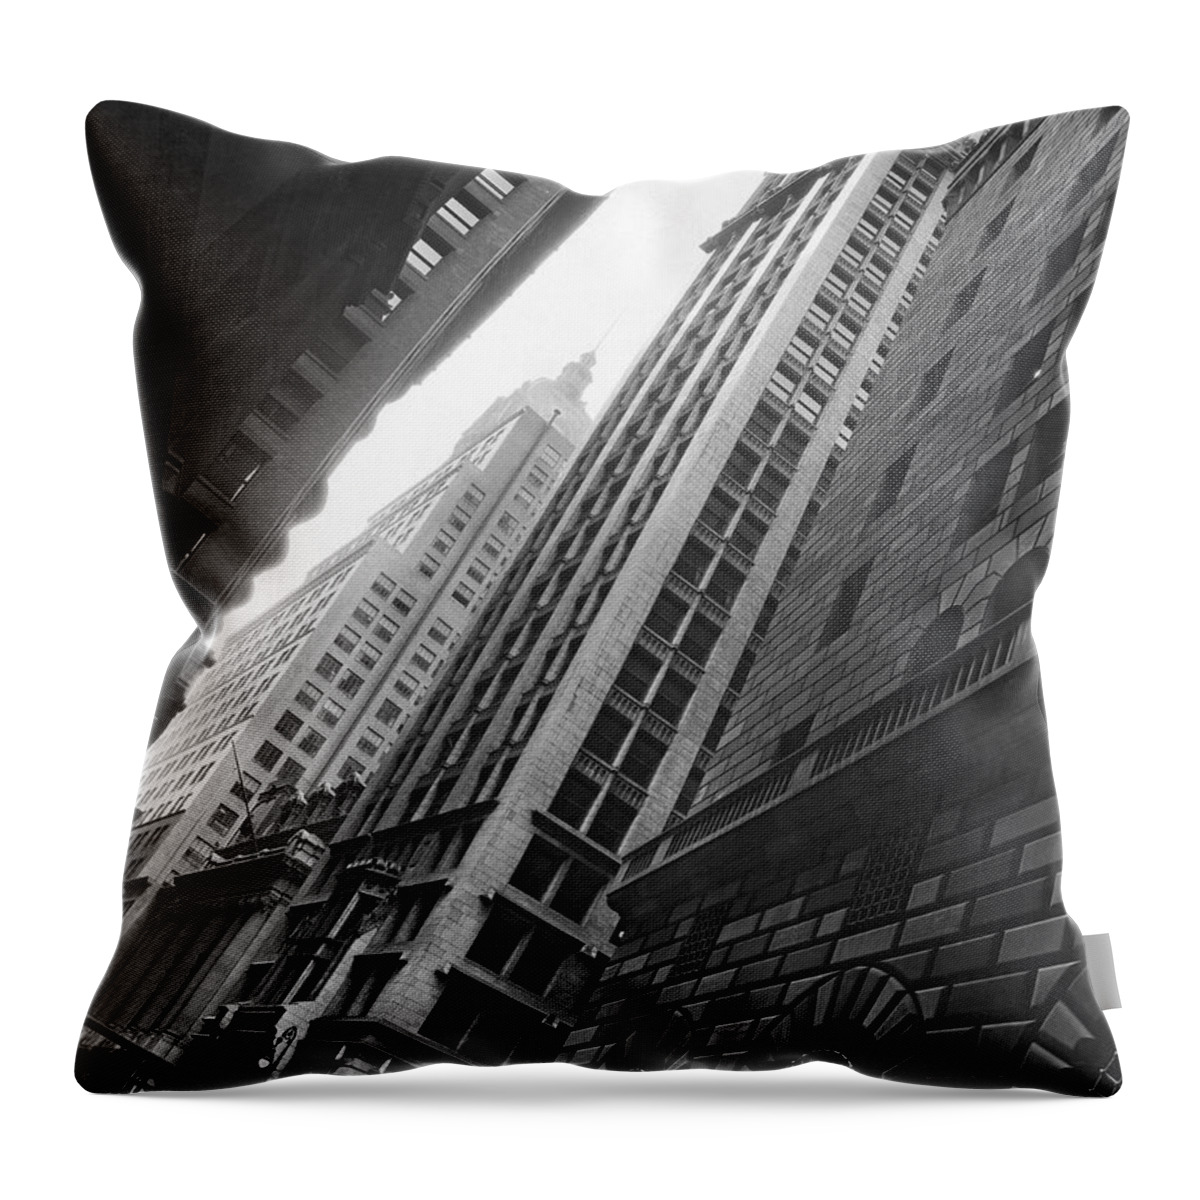 1920s Throw Pillow featuring the photograph Federal Reserve Bank Facade by Underwood & Underwood